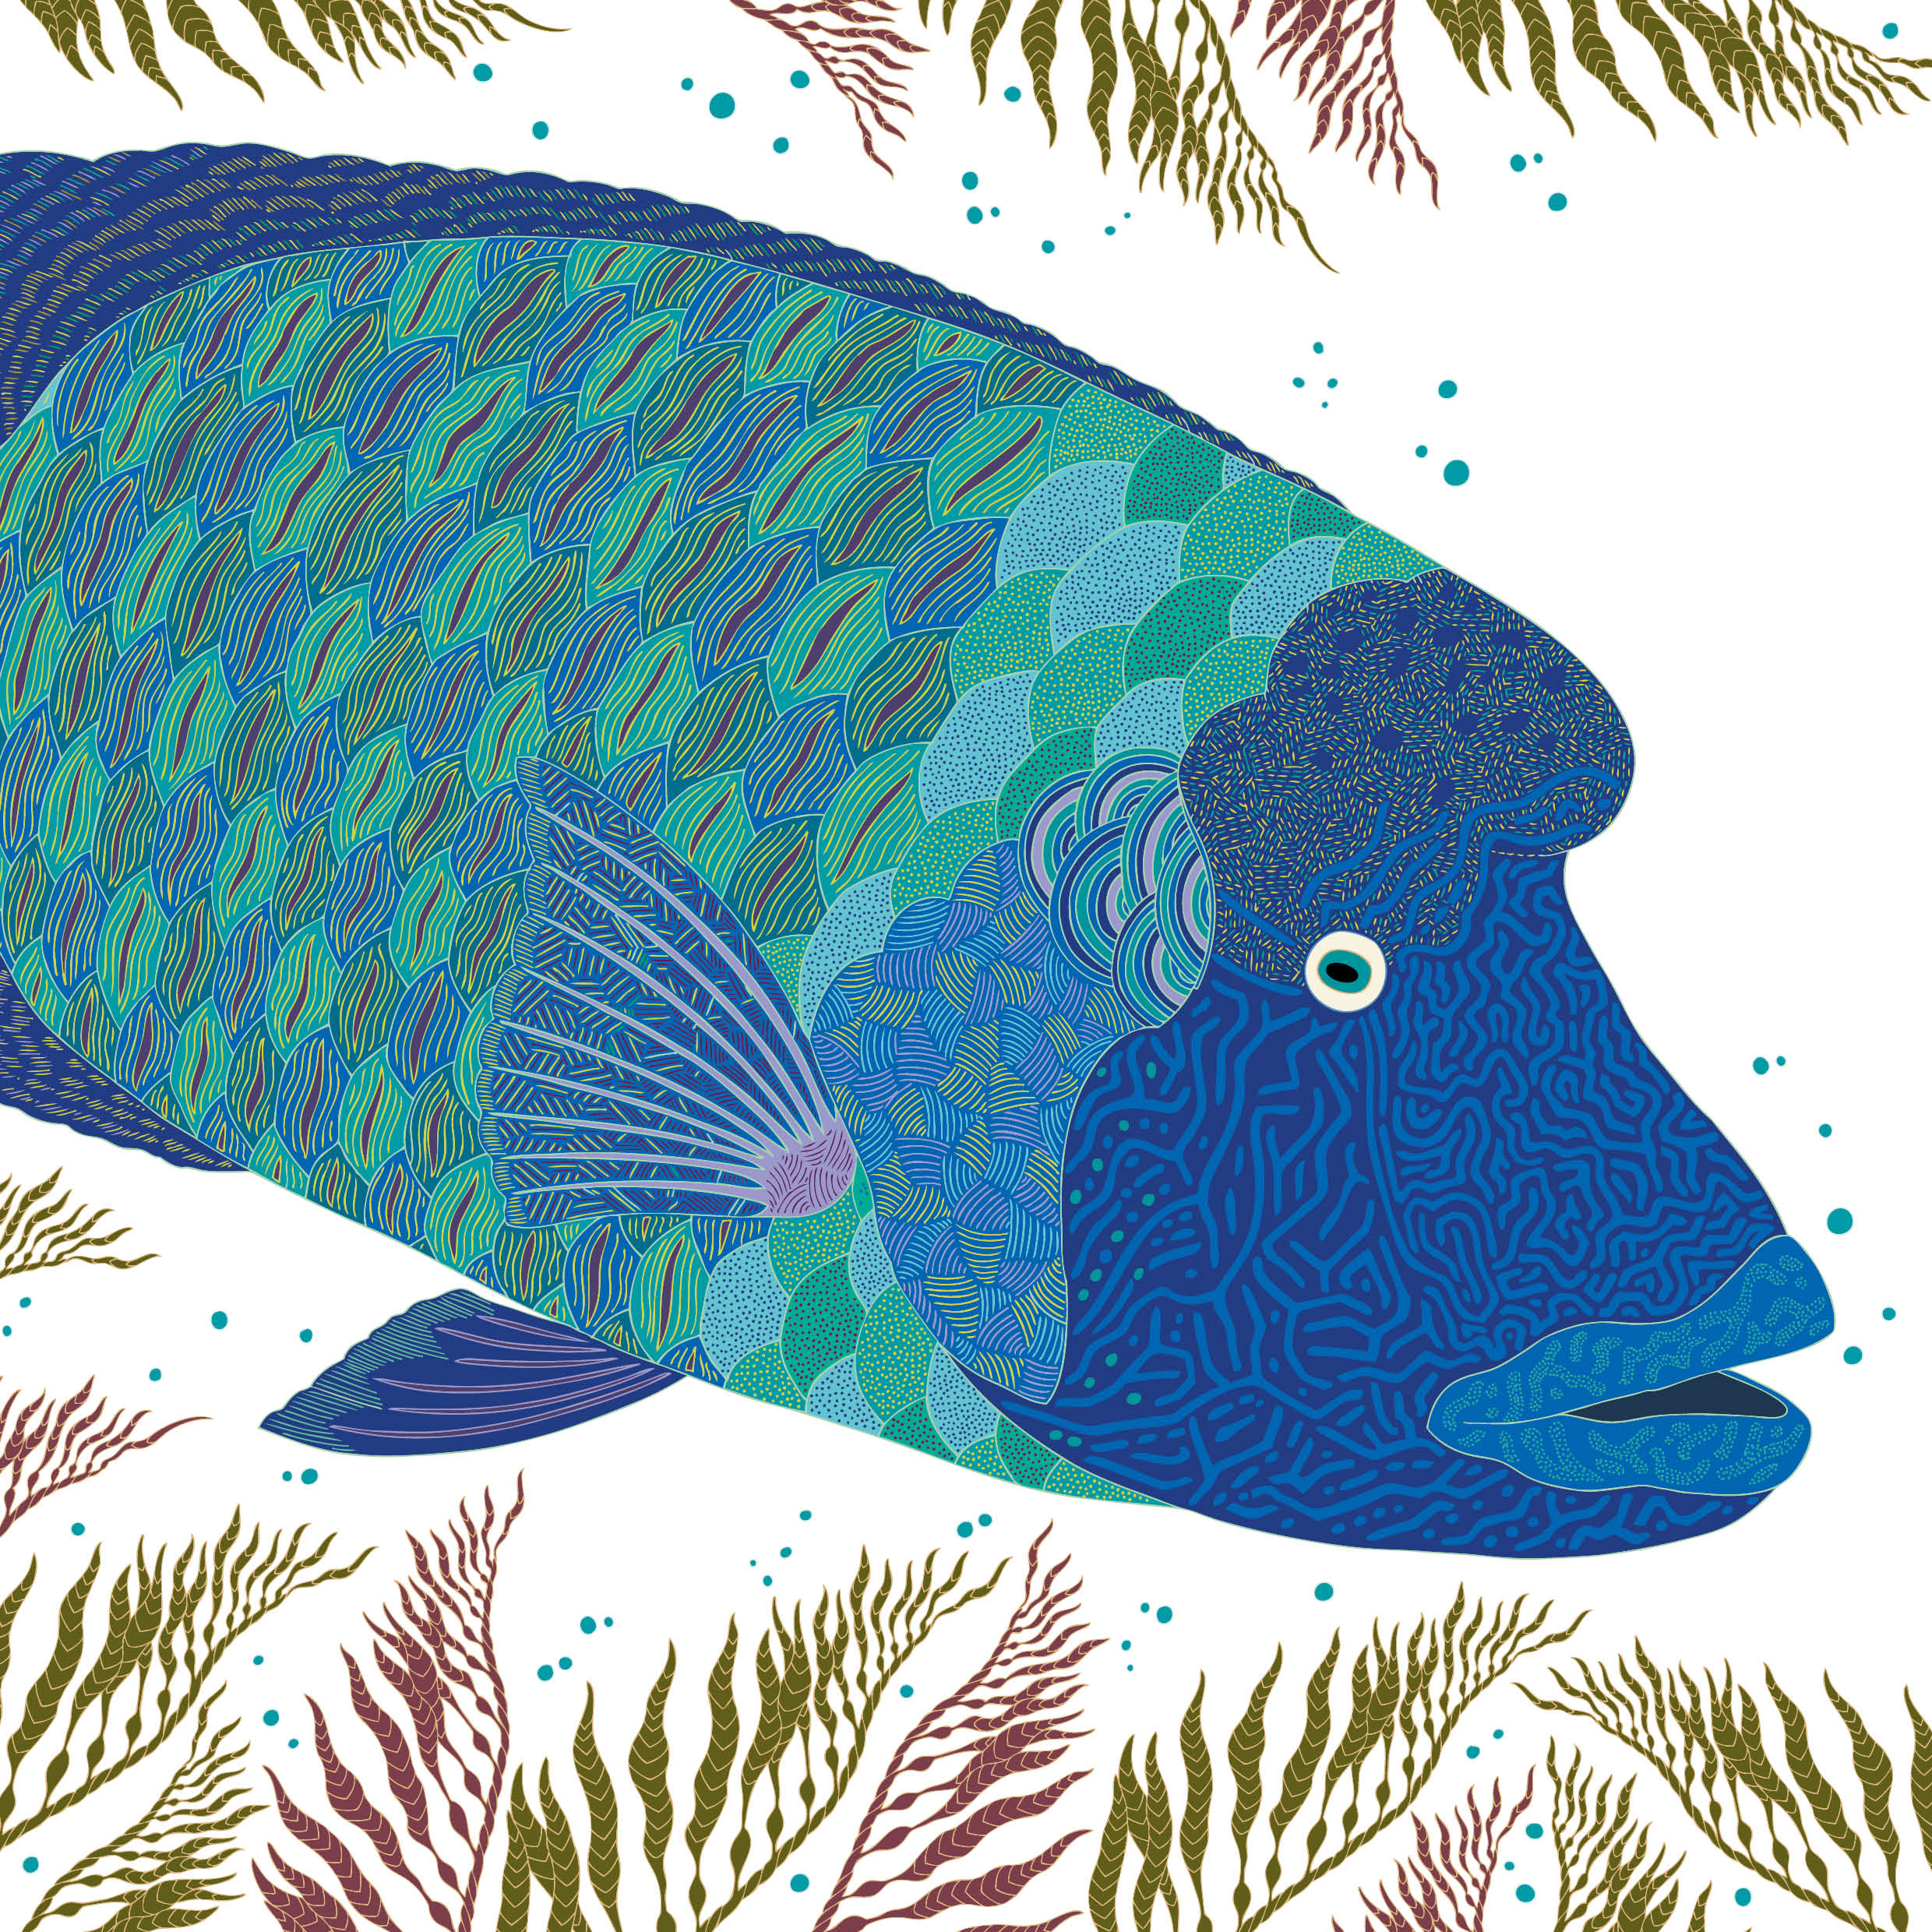 An illustration by Millie Marotta of a humphead wrasse